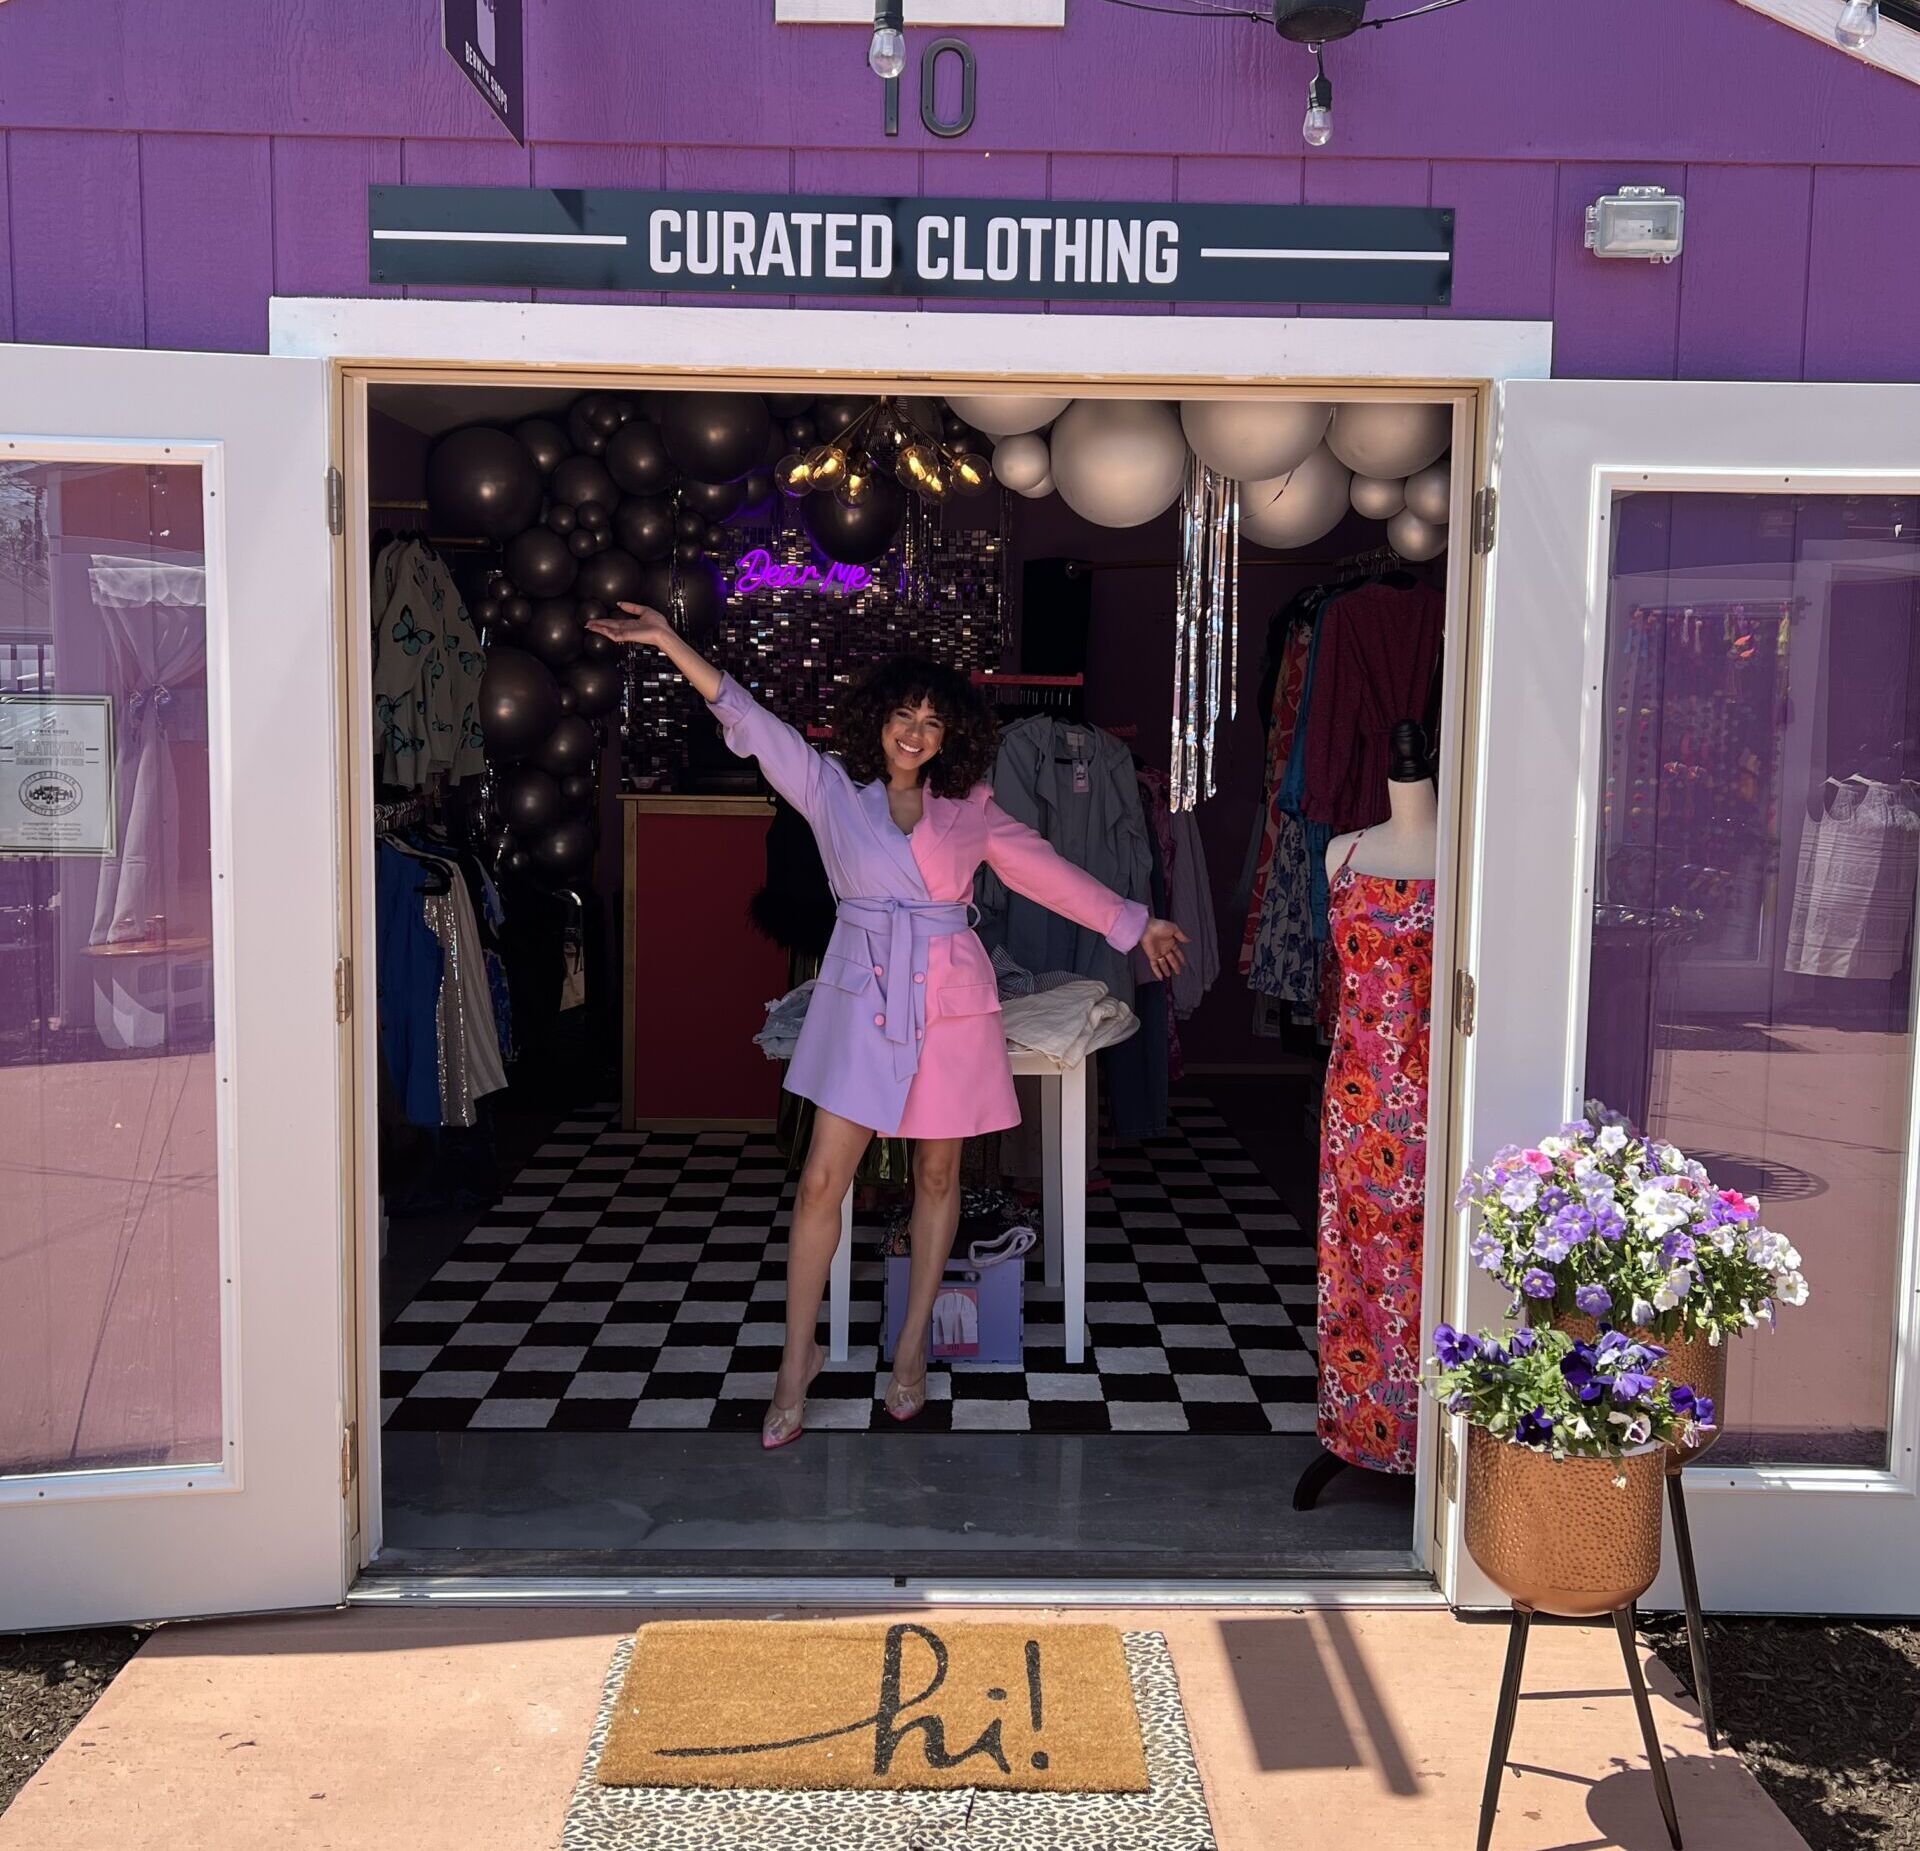 Photo shows Karina Estrada, a Noble Schools alum and owner of Dear Me Fashion Boutique, standing with her arms outstretched in a celebratory manner in the middle of her temporary shop location for Dear Me at Berwyn Shops. The shop is in a small purple building and the double doors are wide open. A welcome mat is in front that says "hi!". Karina is wearing a short dress with long sleeves that is cut in half by color: lavender on the left and bright pink on the right. A black and white sign above the doors says "Curated Clothing"